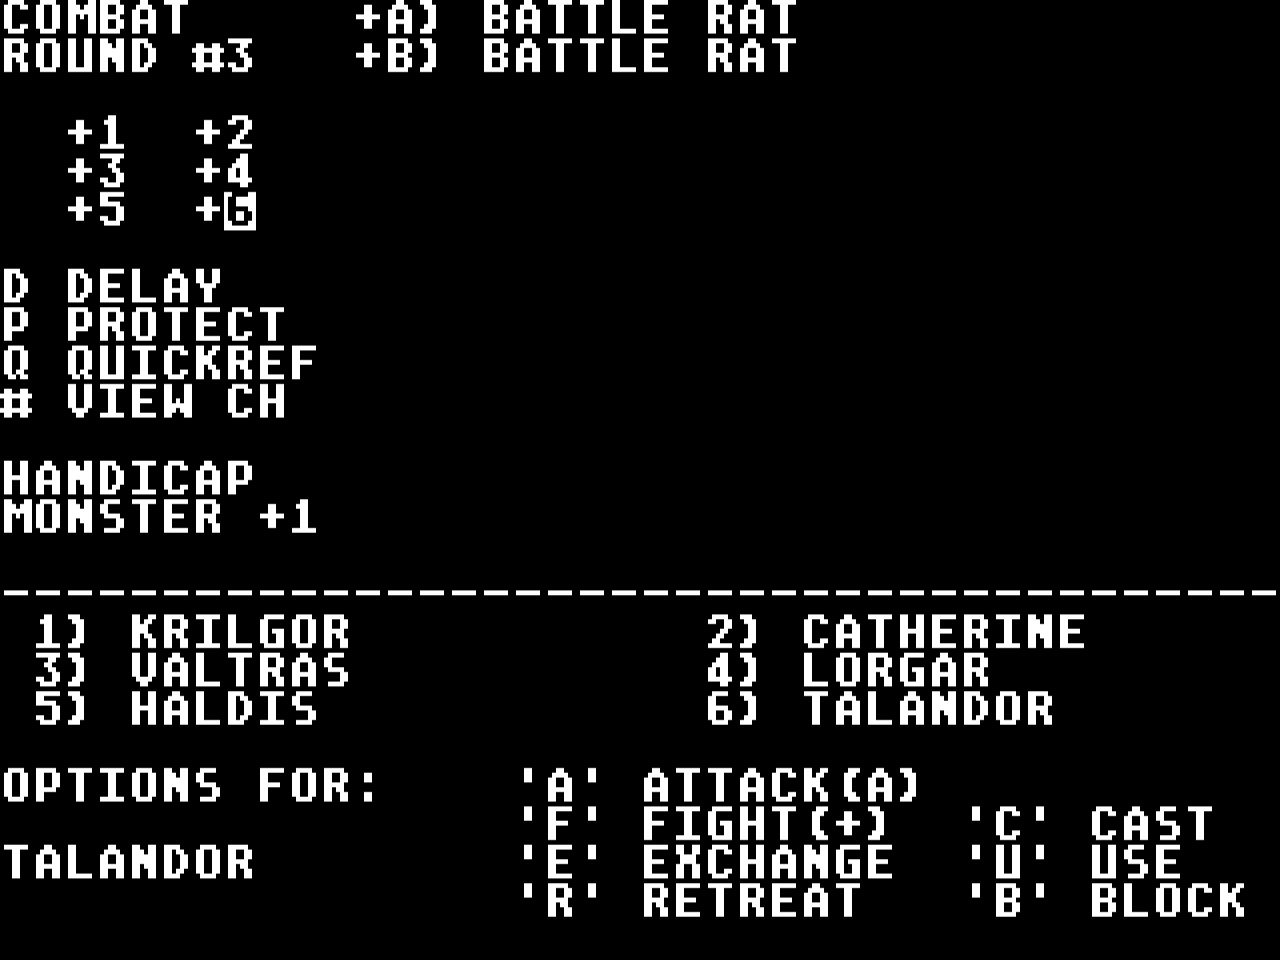 Combat screen, consisting of only text